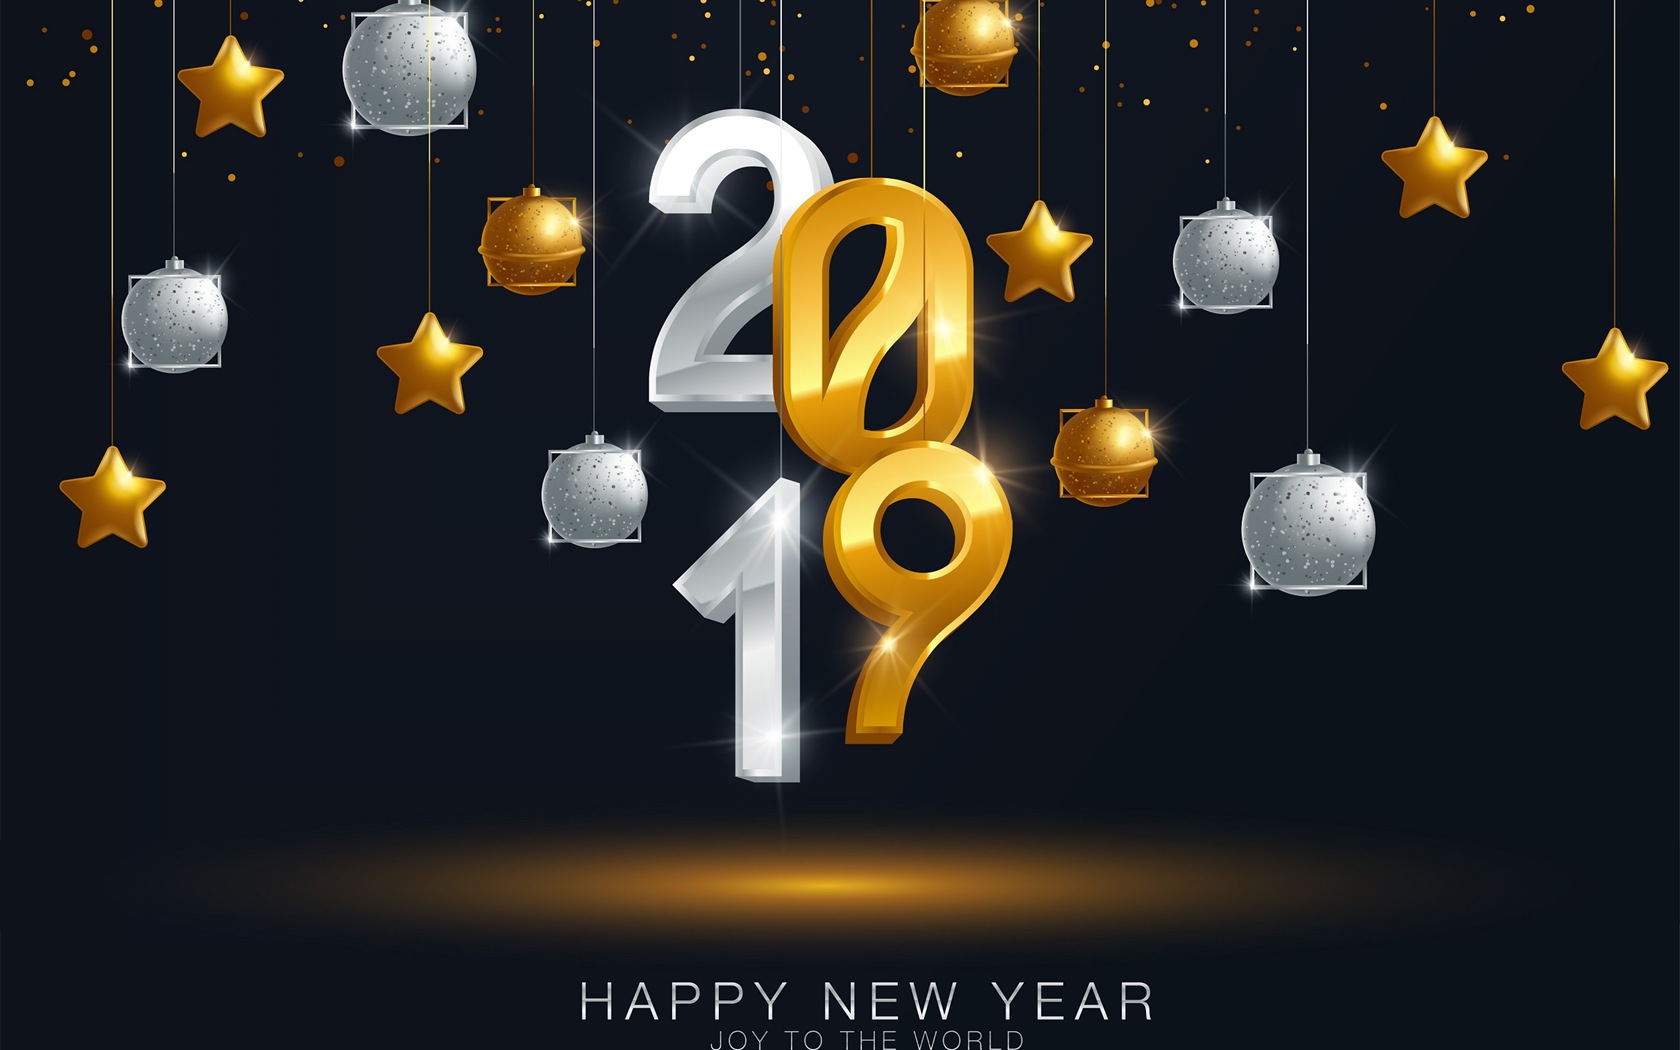 Happy New Year 2019 HD wallpapers #12 - 1680x1050